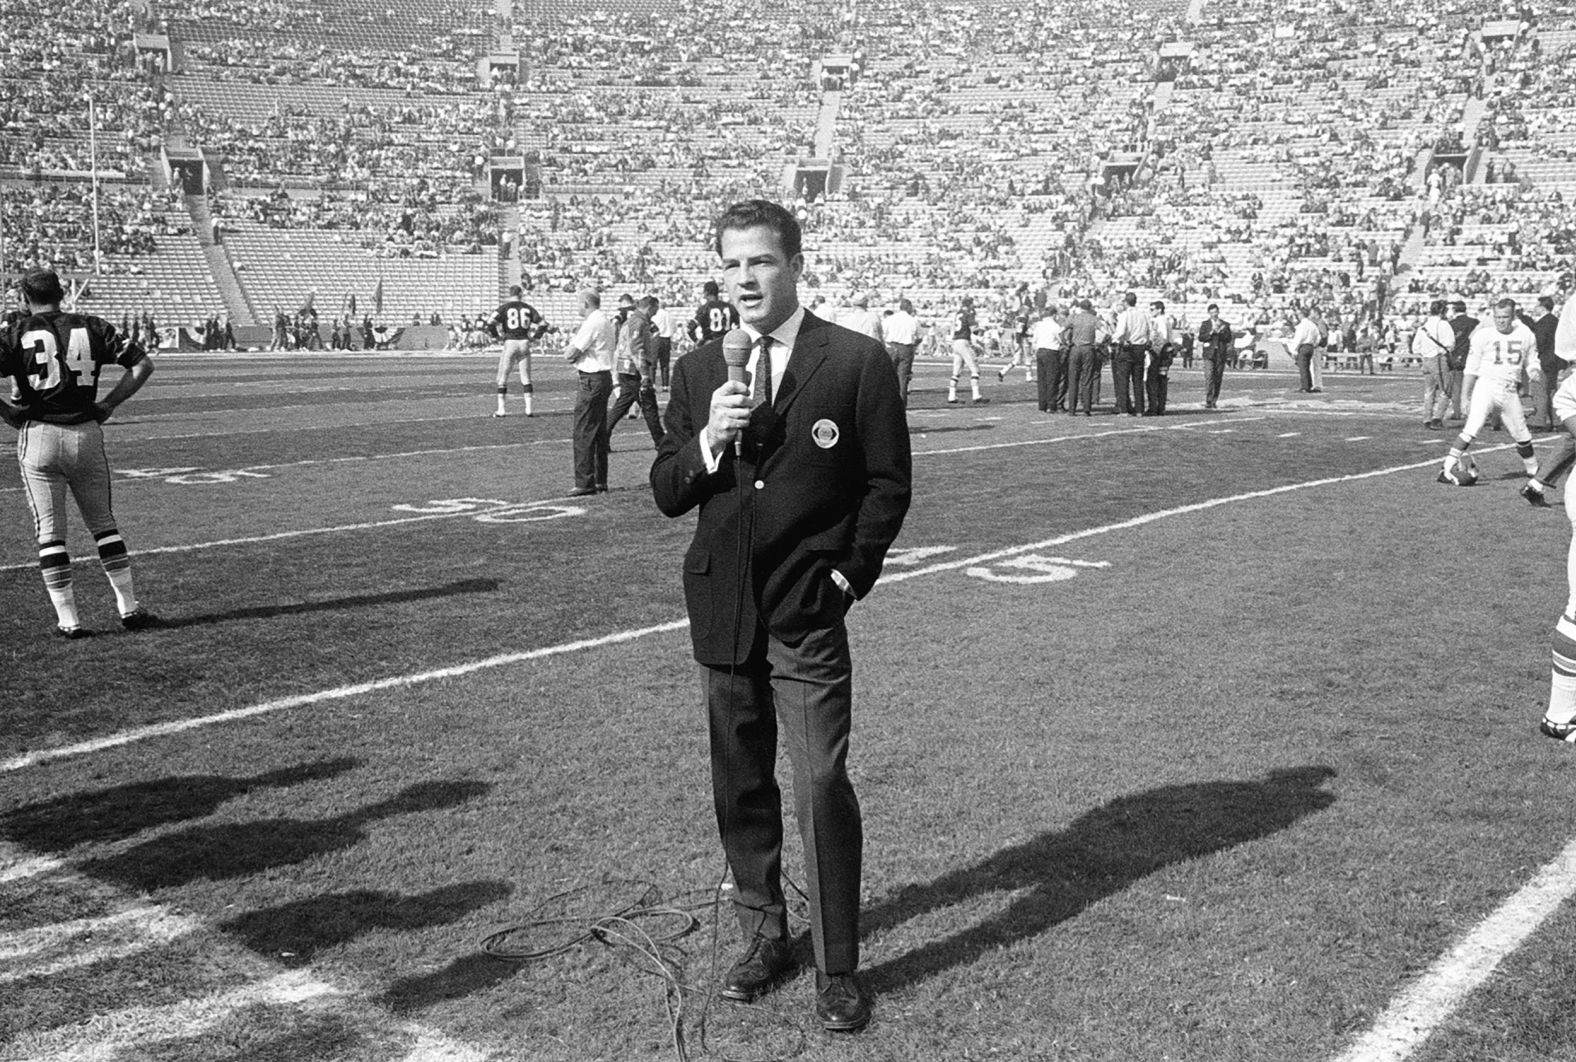 CBS commentator Frank Gifford works on the field before the game. The game was televised by both CBS and NBC. CBS held the rights to NFL games, while NBC had the rights to AFL games.